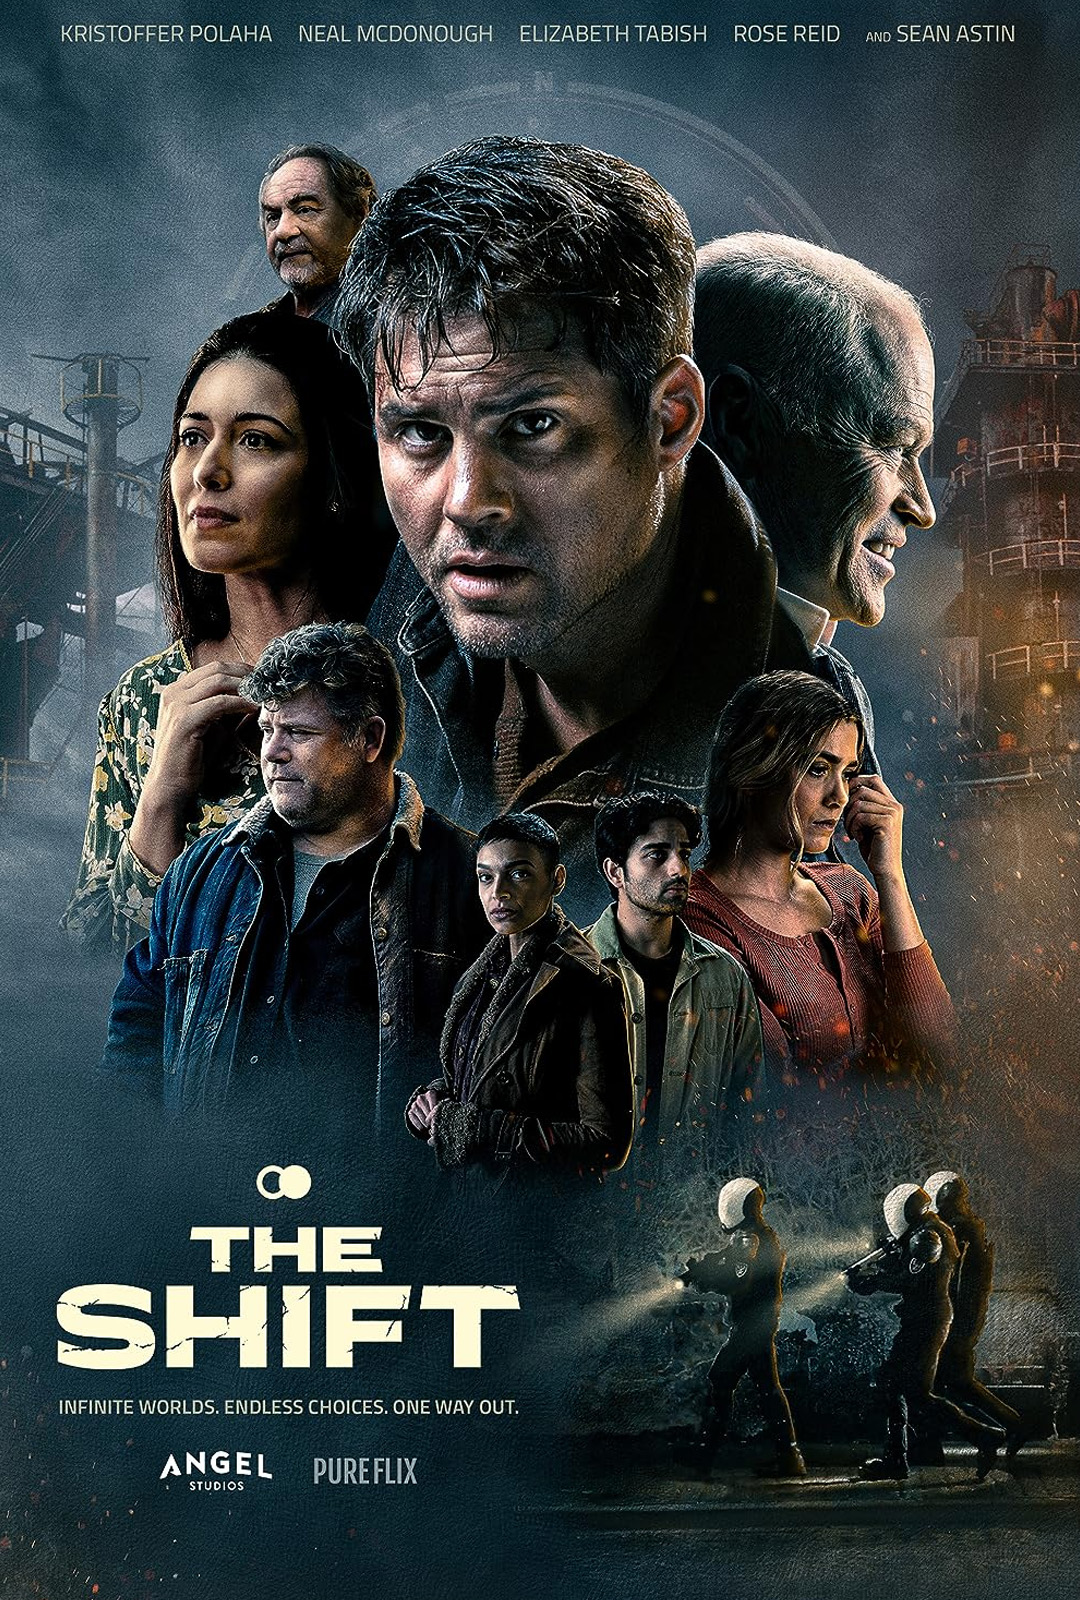 Movie Poster: The Shift